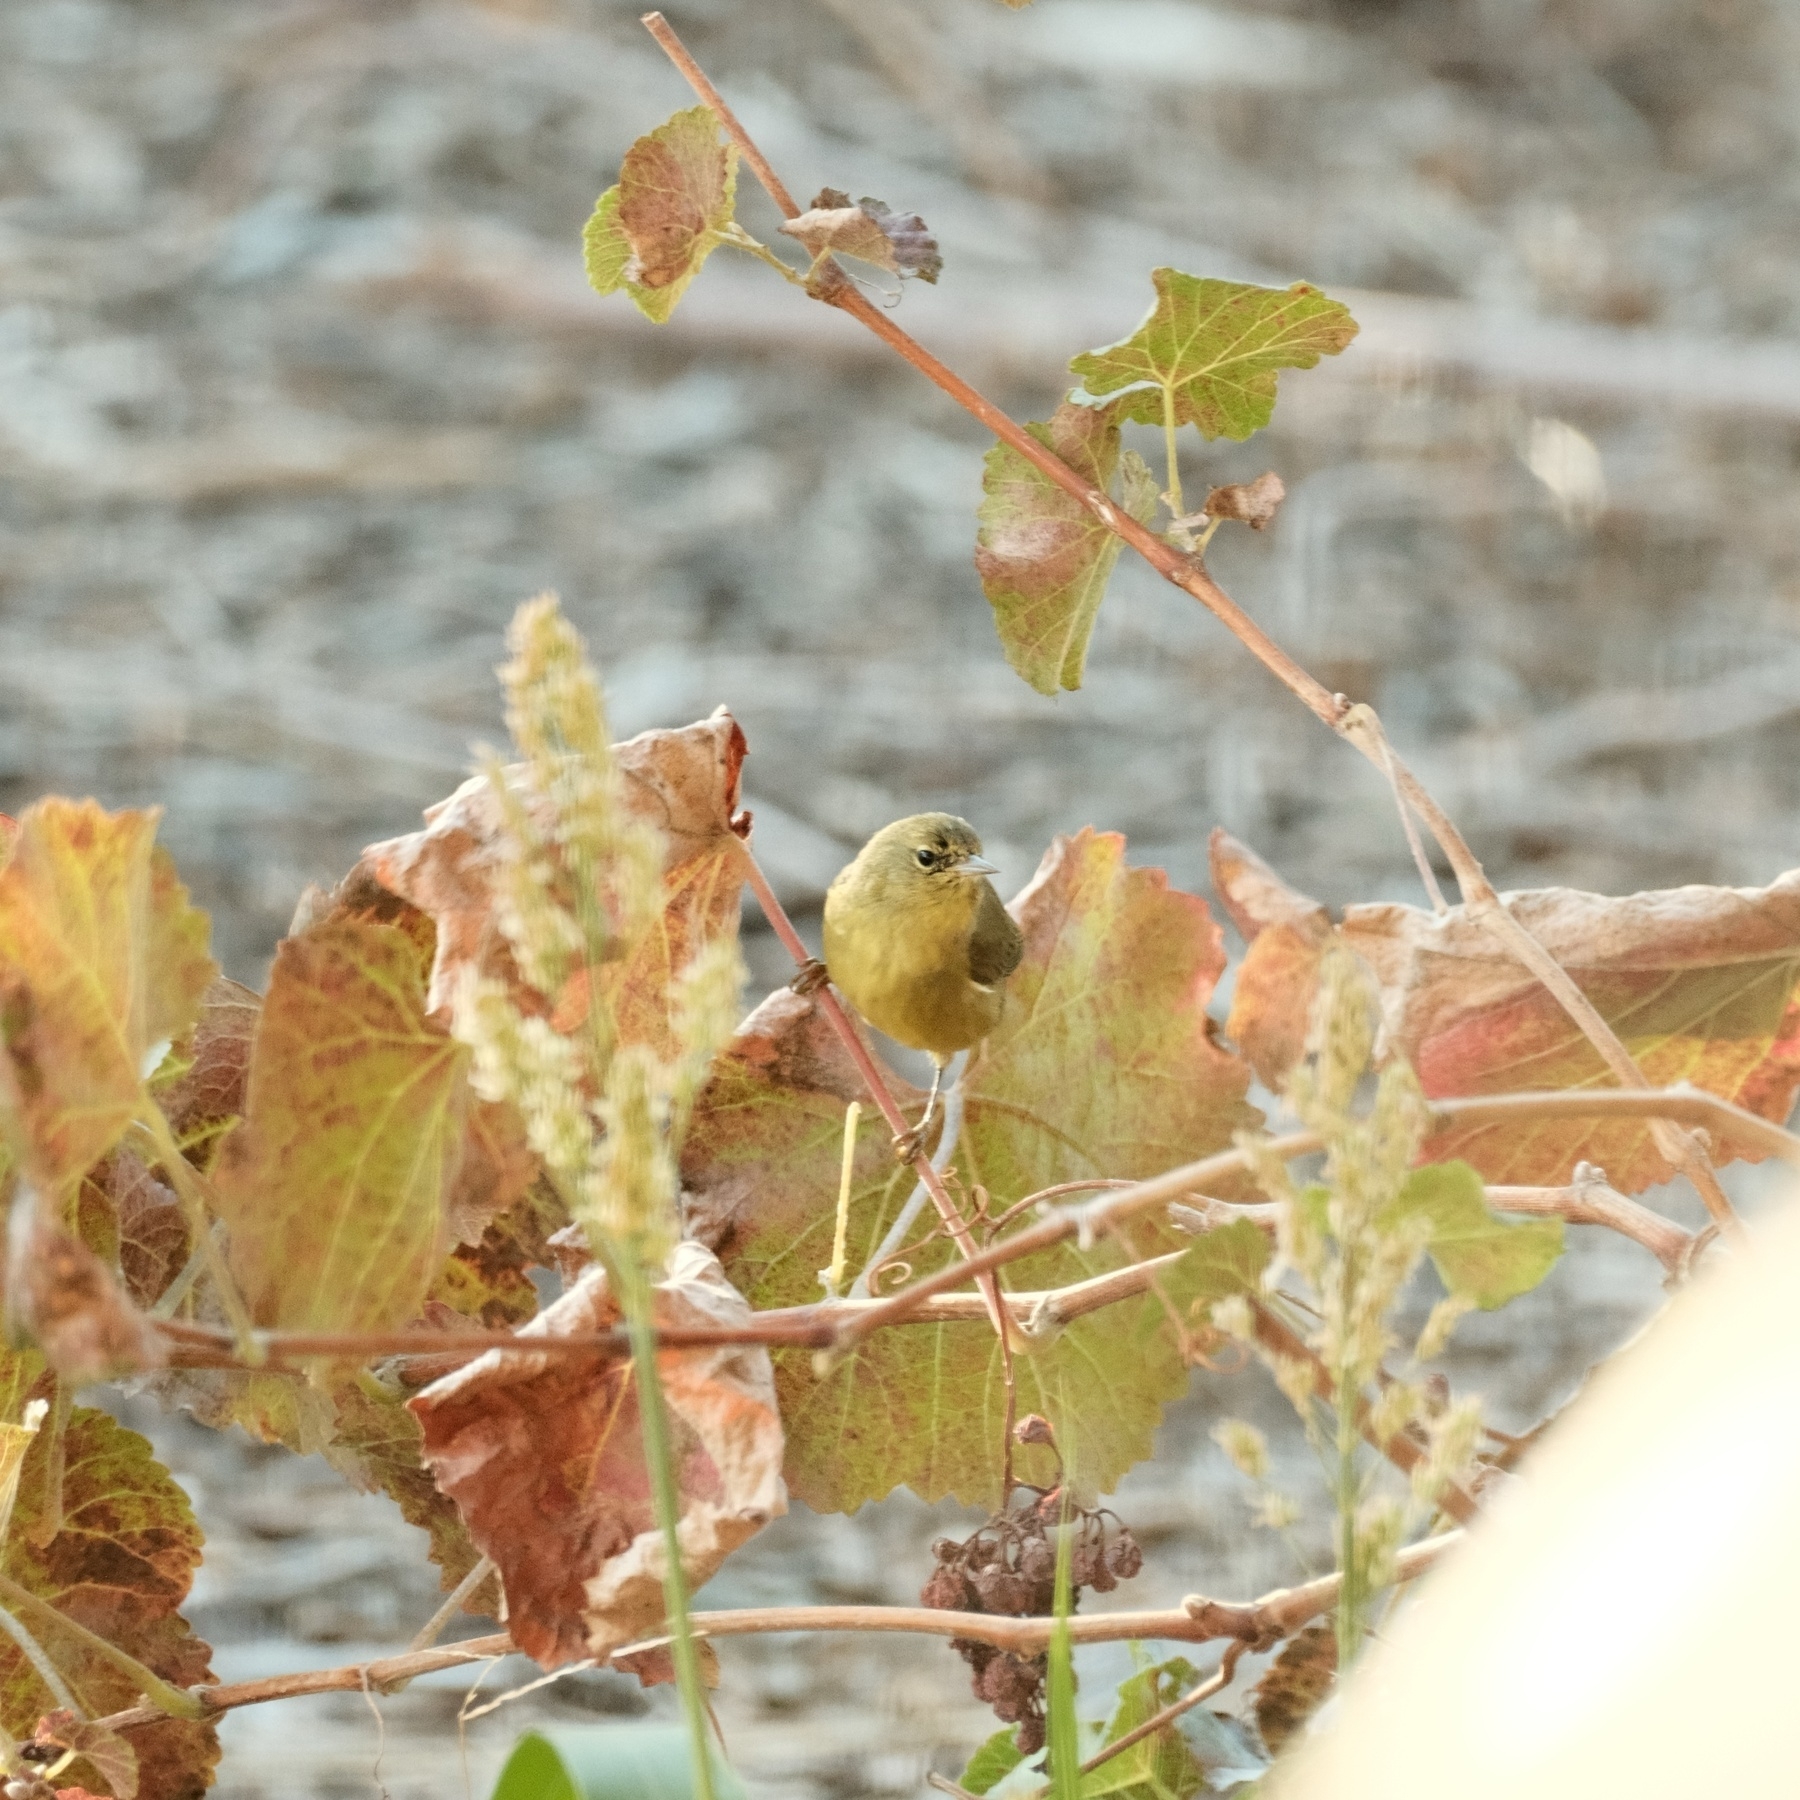 A yellow bird straddles a thin grape vine among red and yellow grape leaves.